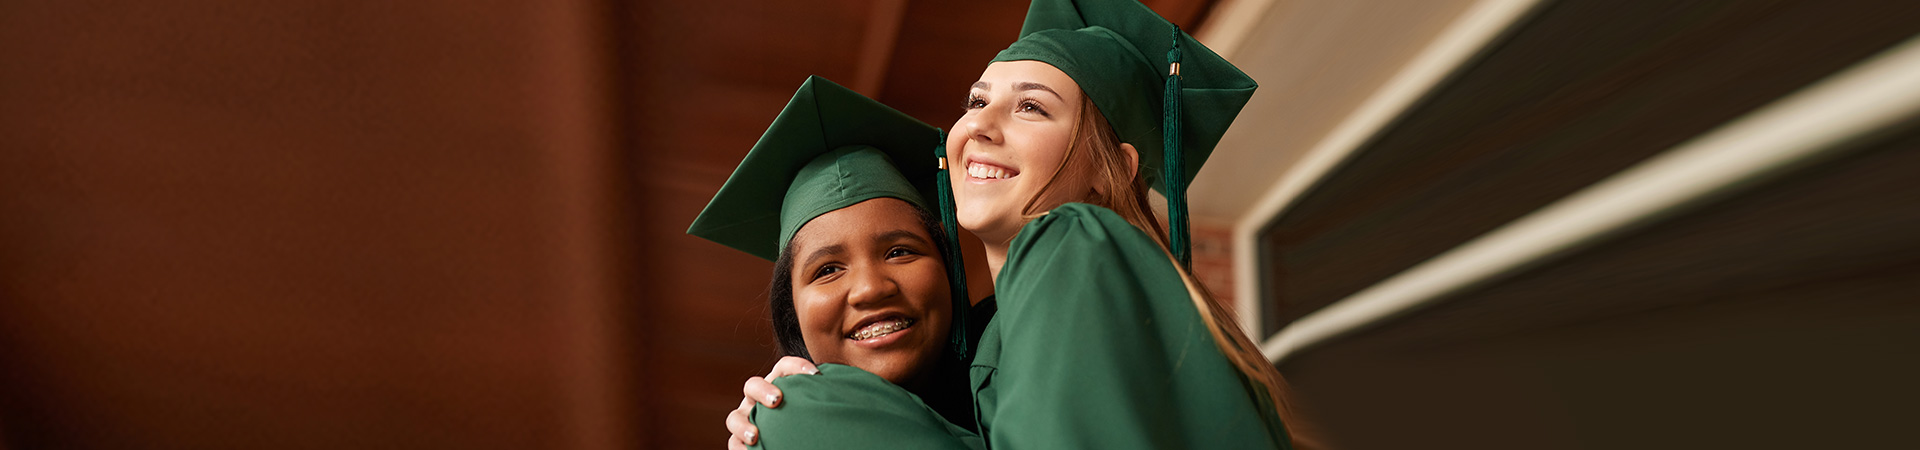  two high school girl scouts in graduation robes hugging and smiling 